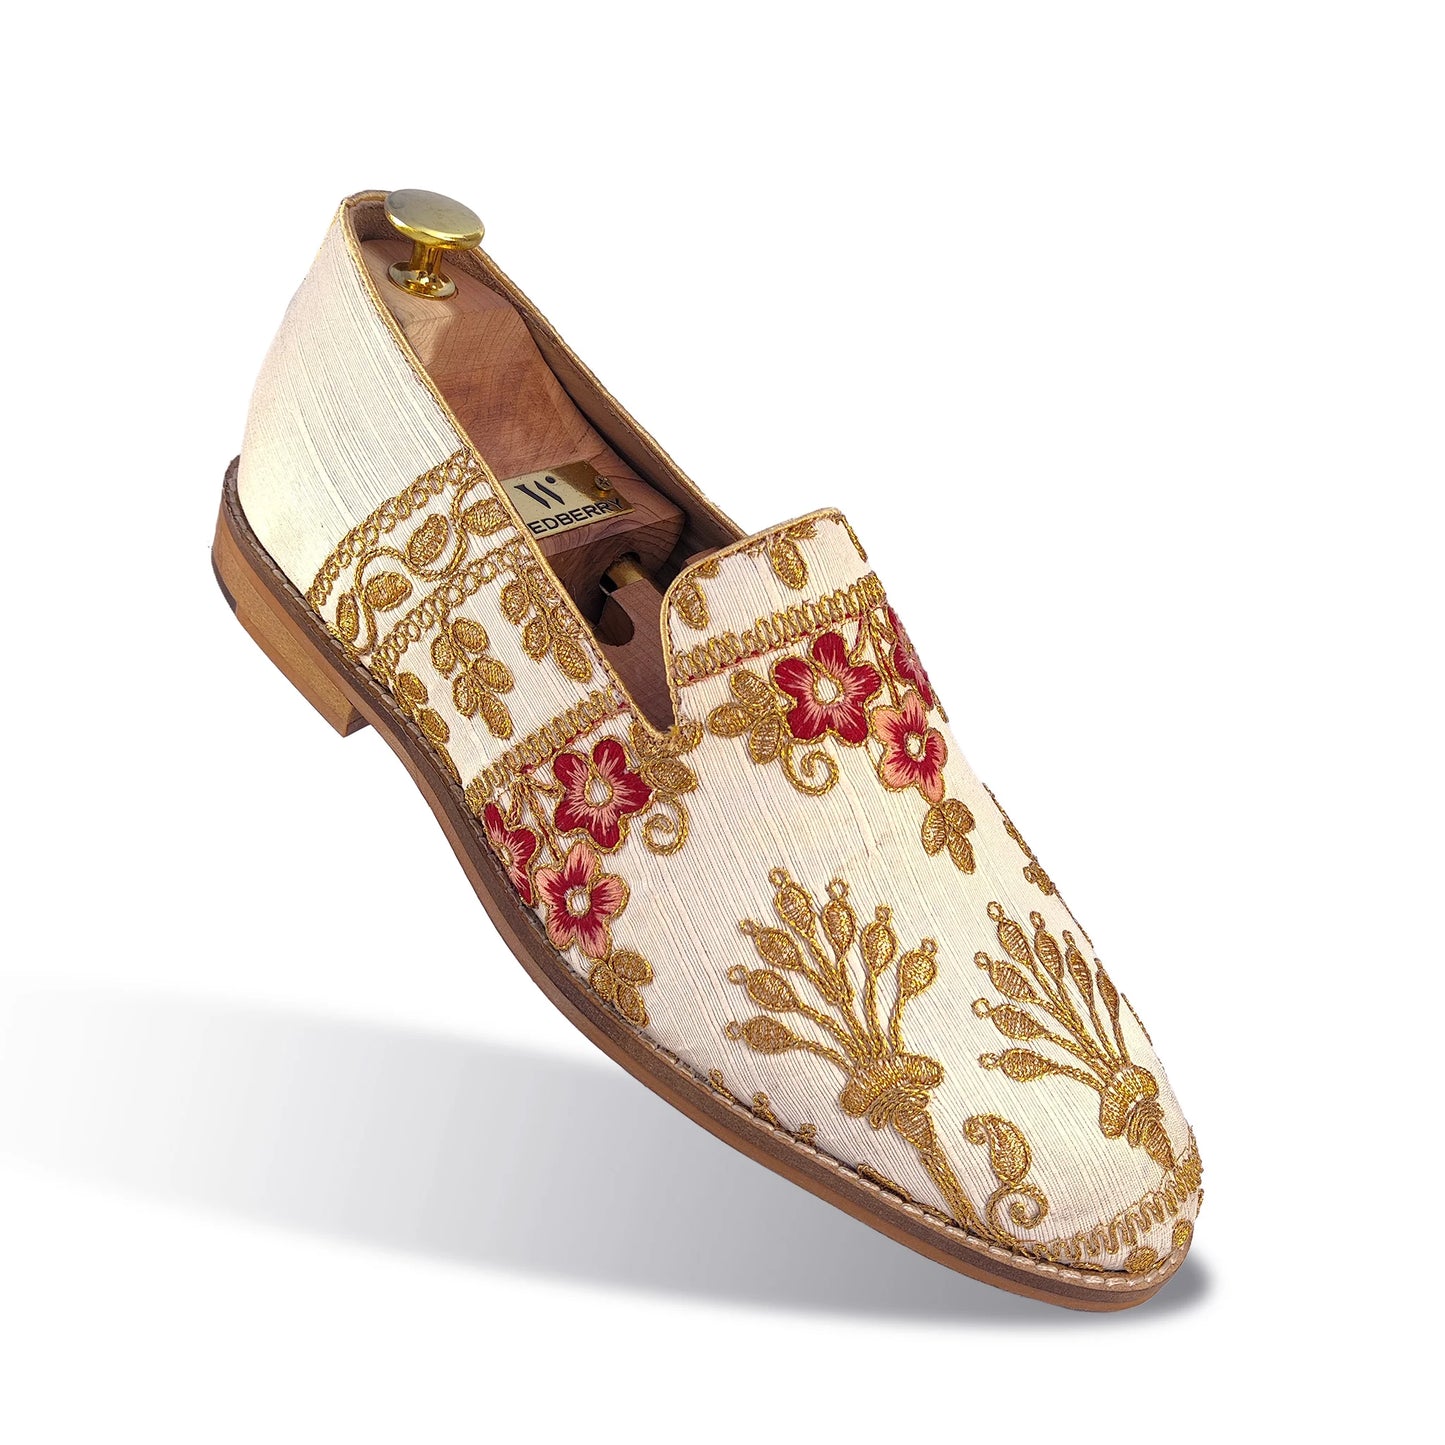 Biege Gold and Cherry Embroidery Loafer Mojari Slipon for Men